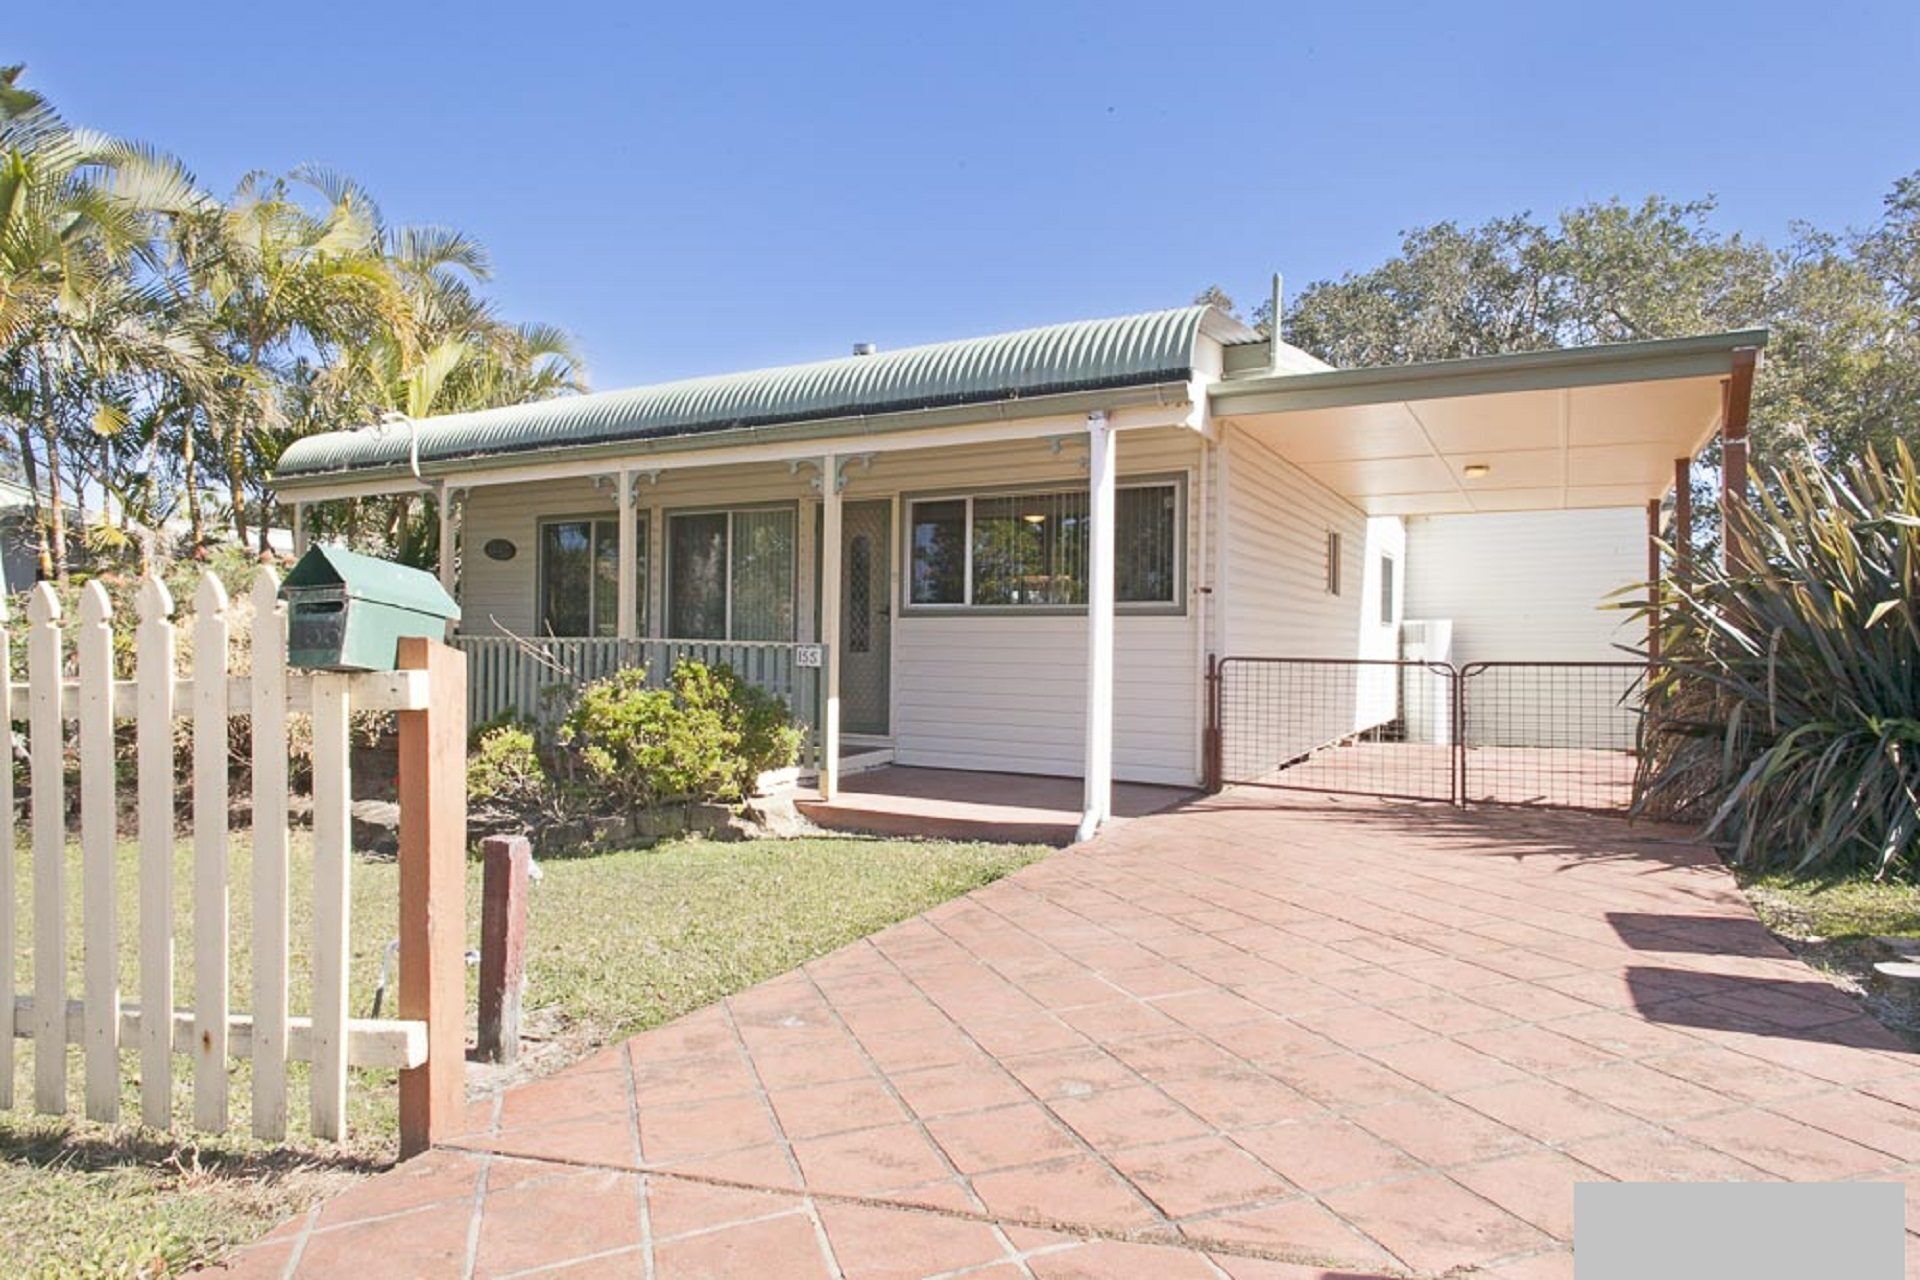 Ryans Cottage in Sawtell